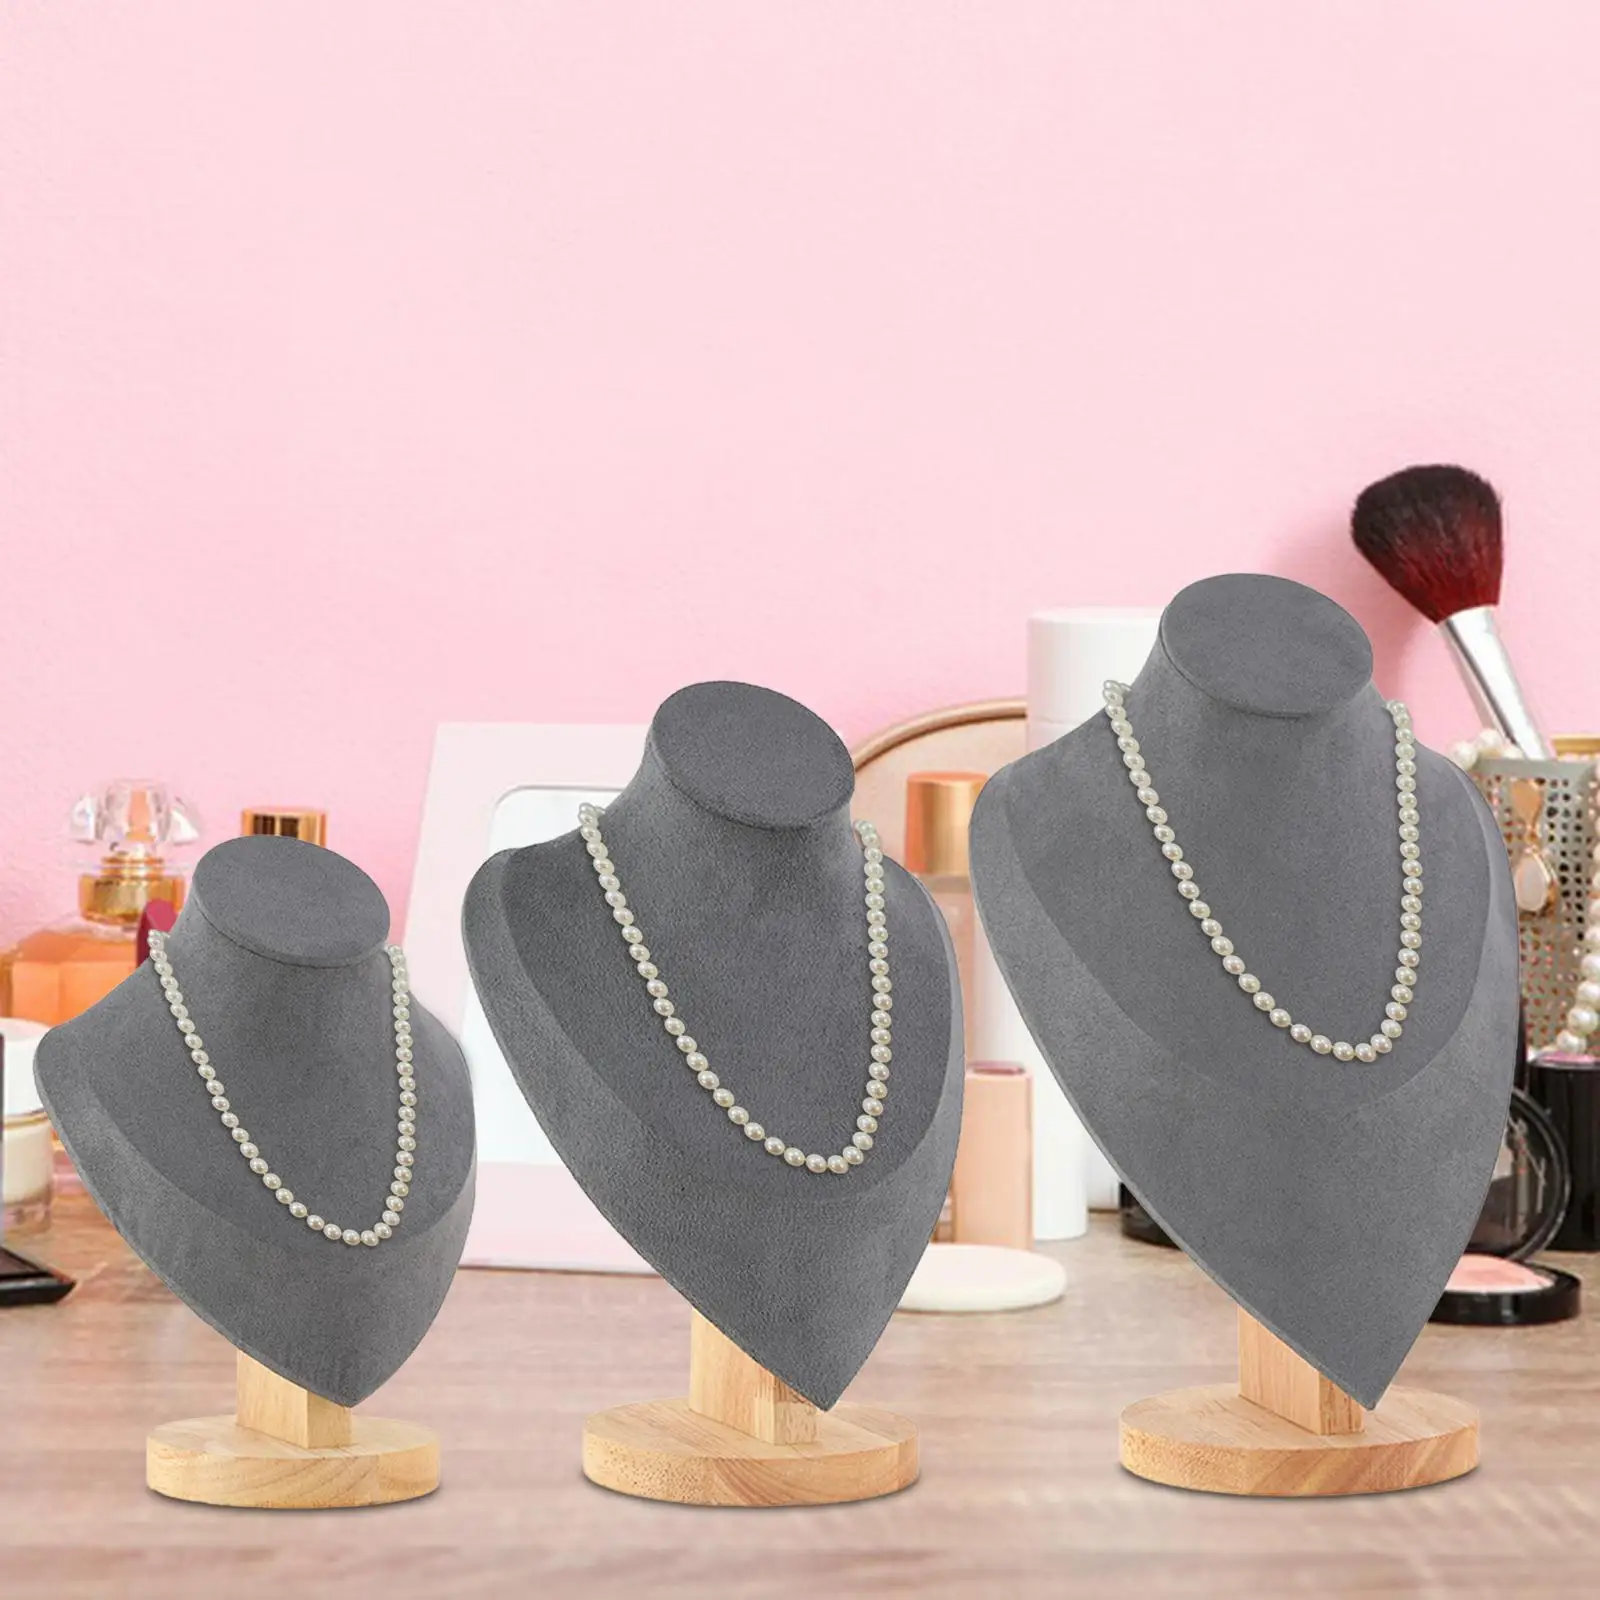 Jewelry Display Mannequin Bust Model Chain Bust Stand for Choker Show Jewelry Organizer Model Retail Store Salon Dresser